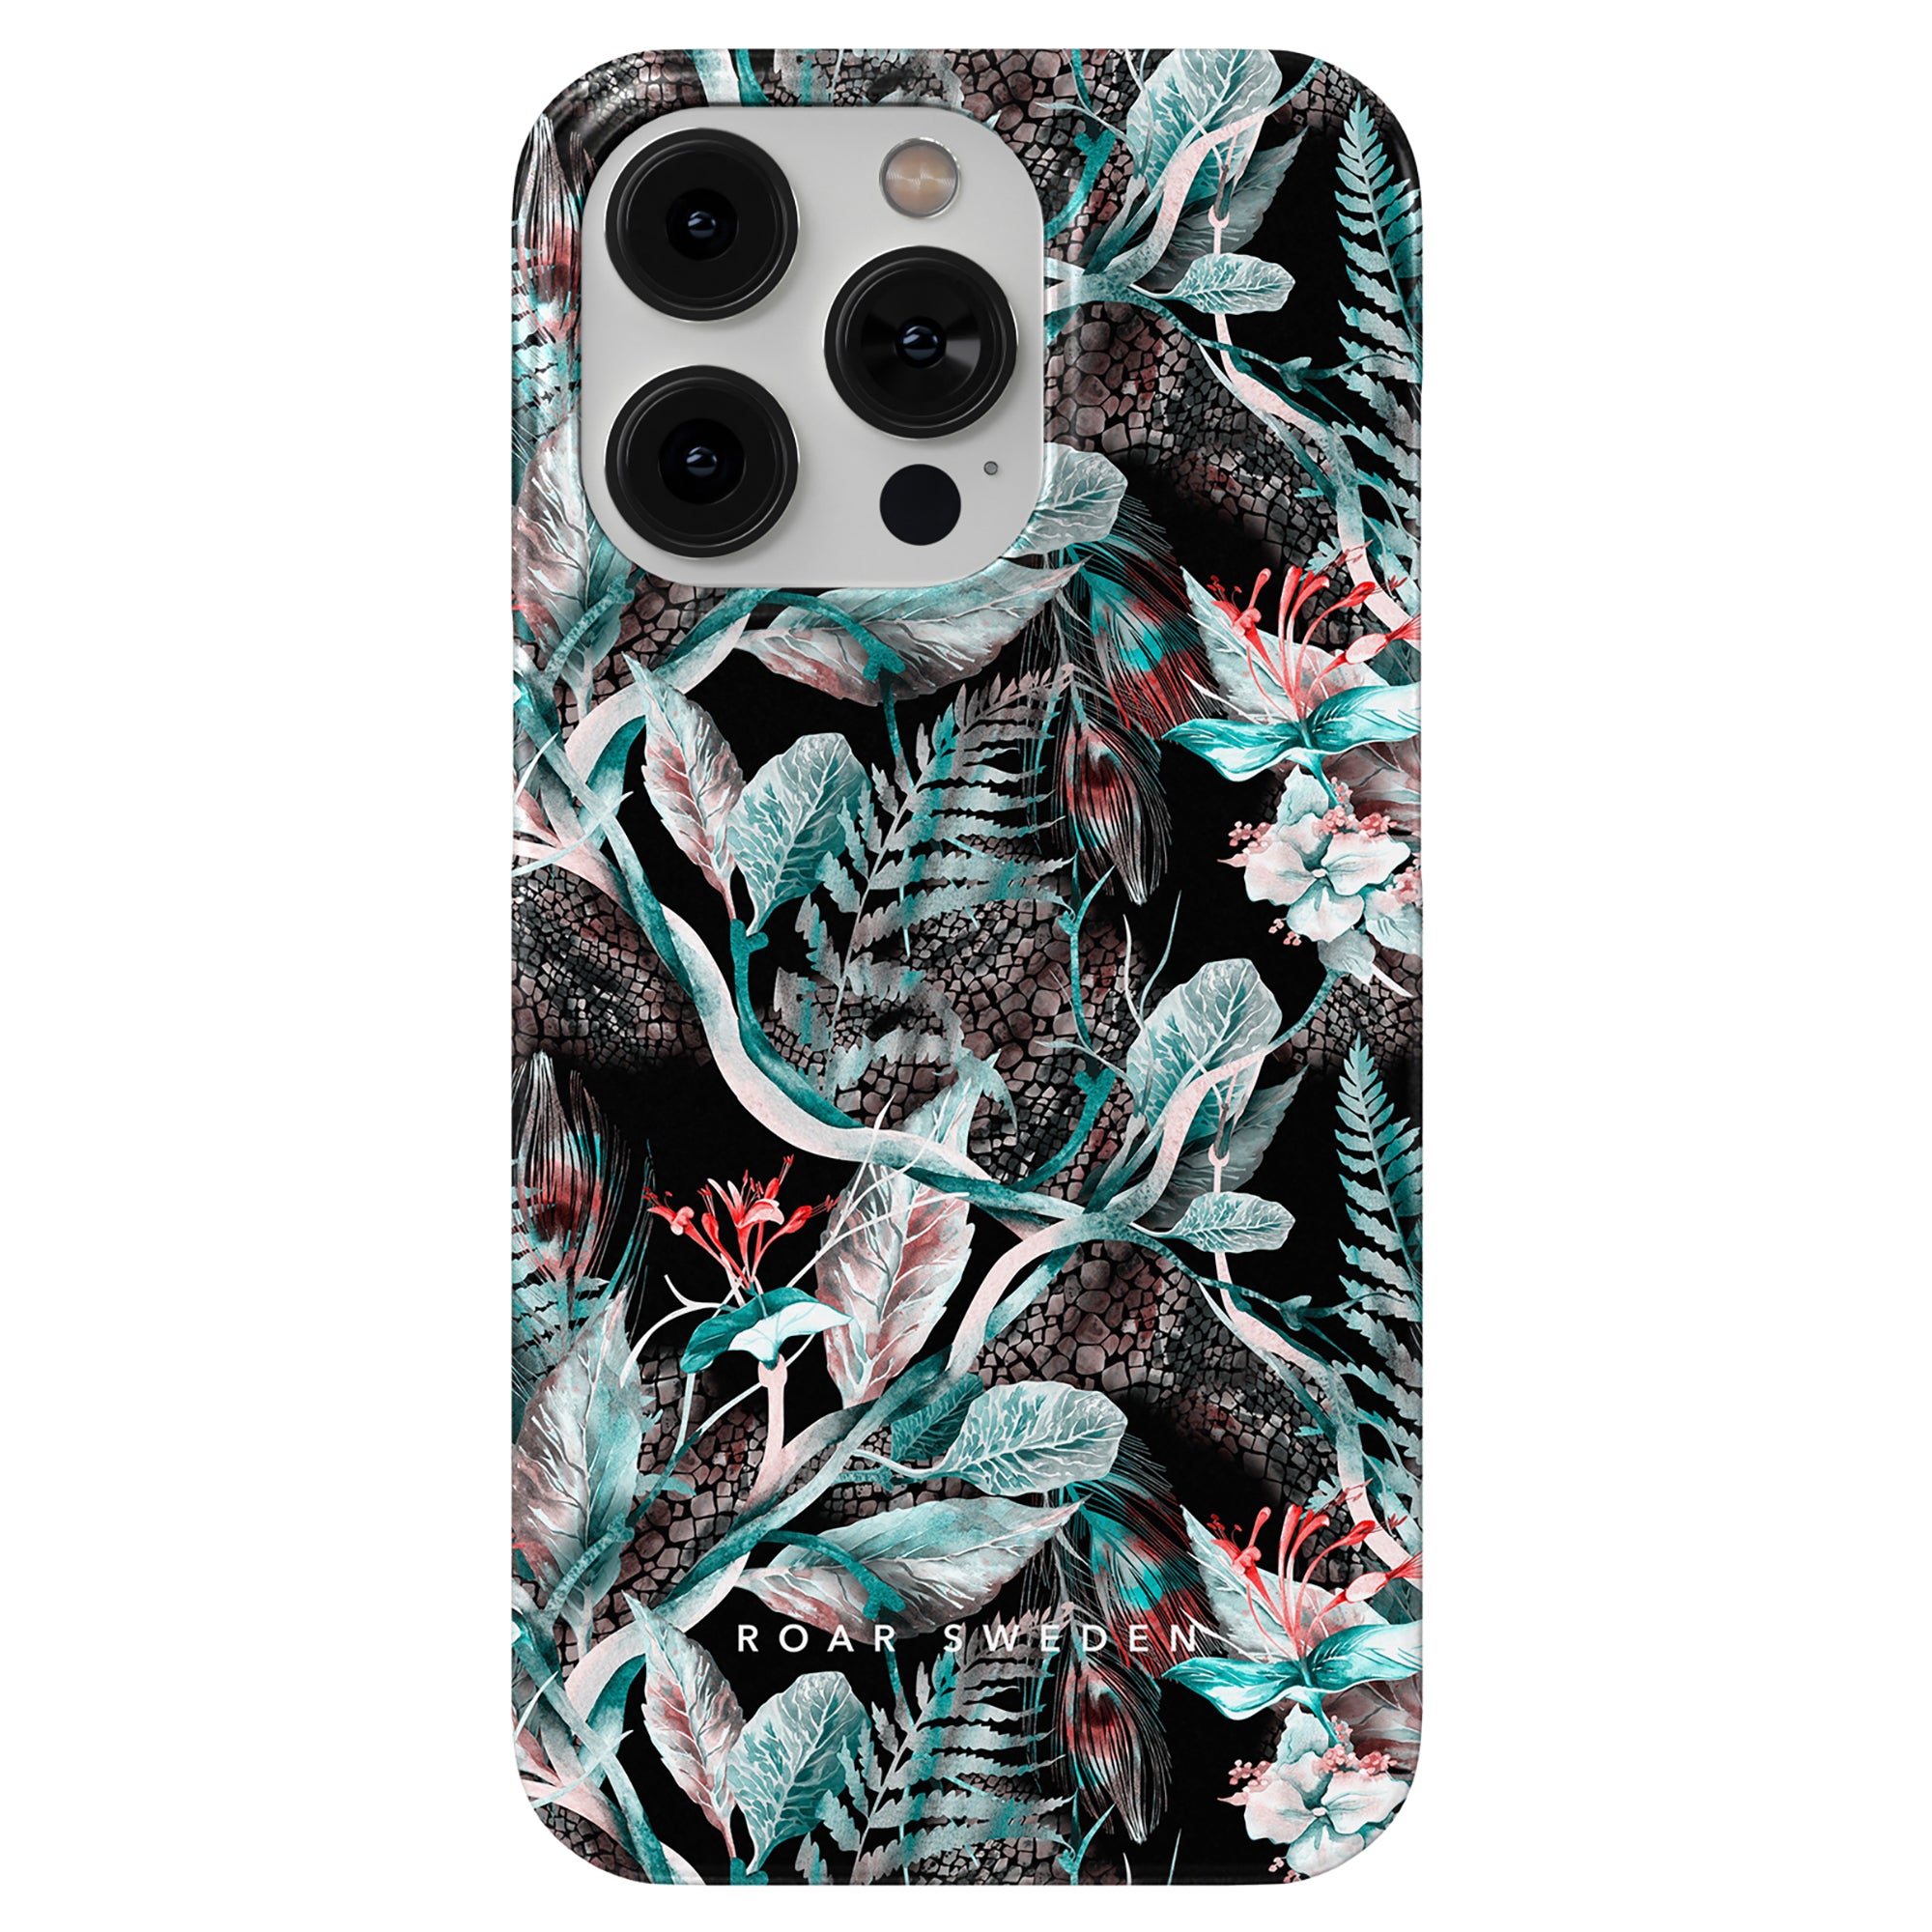 A high-quality and durable Snake Jungle - Slim case with a tropical print. This unique and trendy nyande design features a jungle pattern with snake skin motifs that will give your smartphone a fashionable look. It is